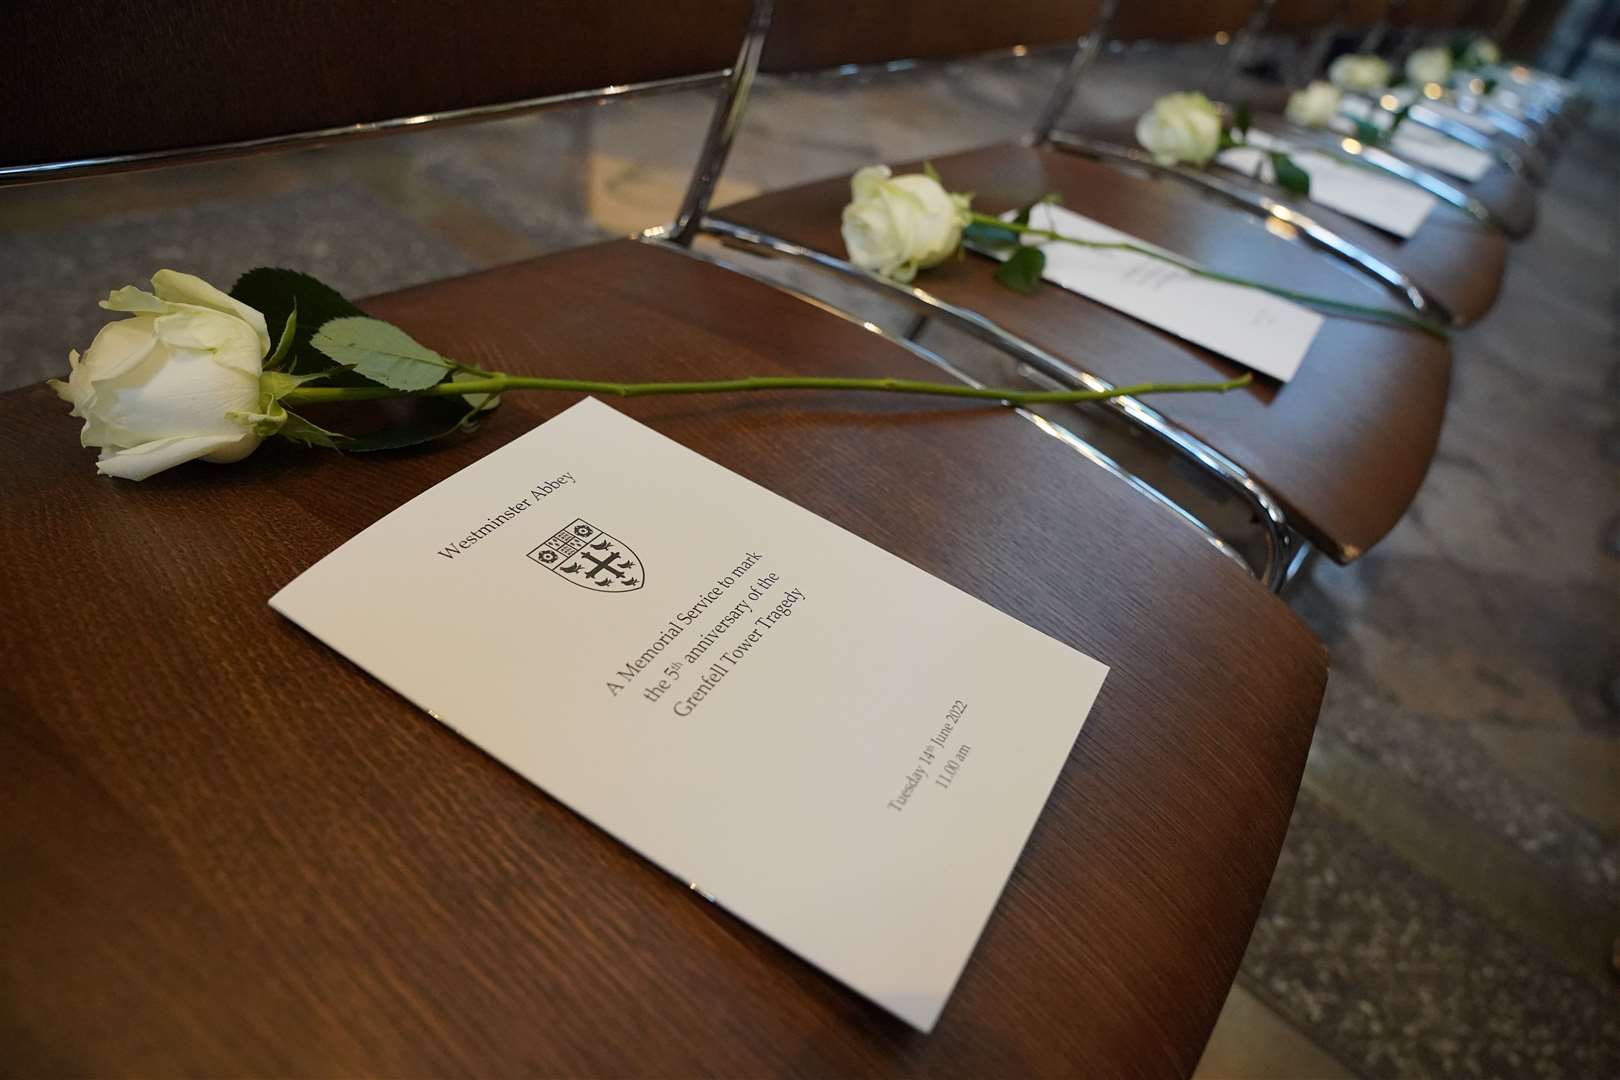 An order of service and white rose were placed on chairs at the memorial service at Westminster Abbey (Jonathan Brady/PA)